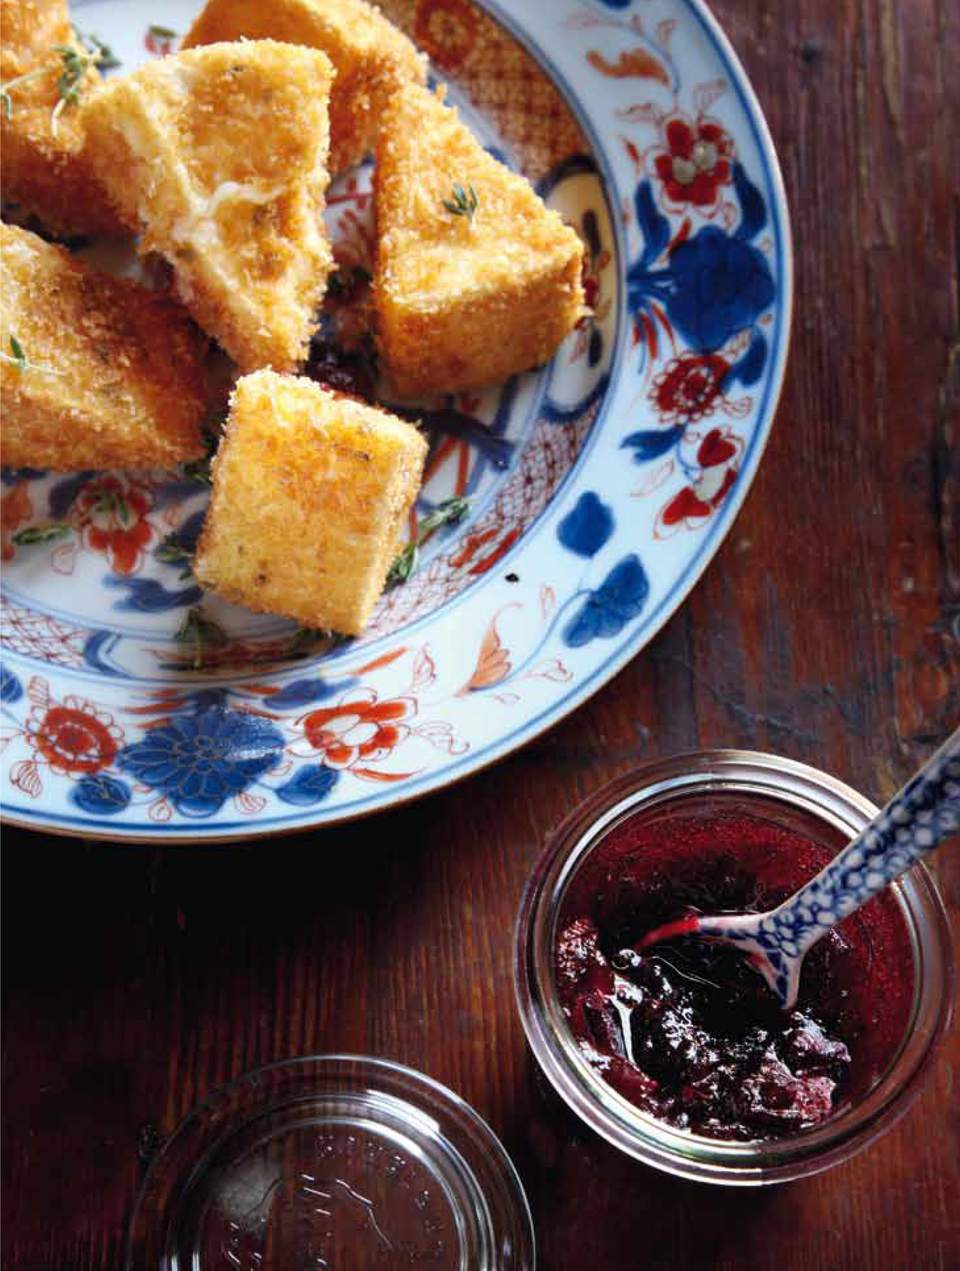 Recipe for Fried Camembert With Cranberry Sauce